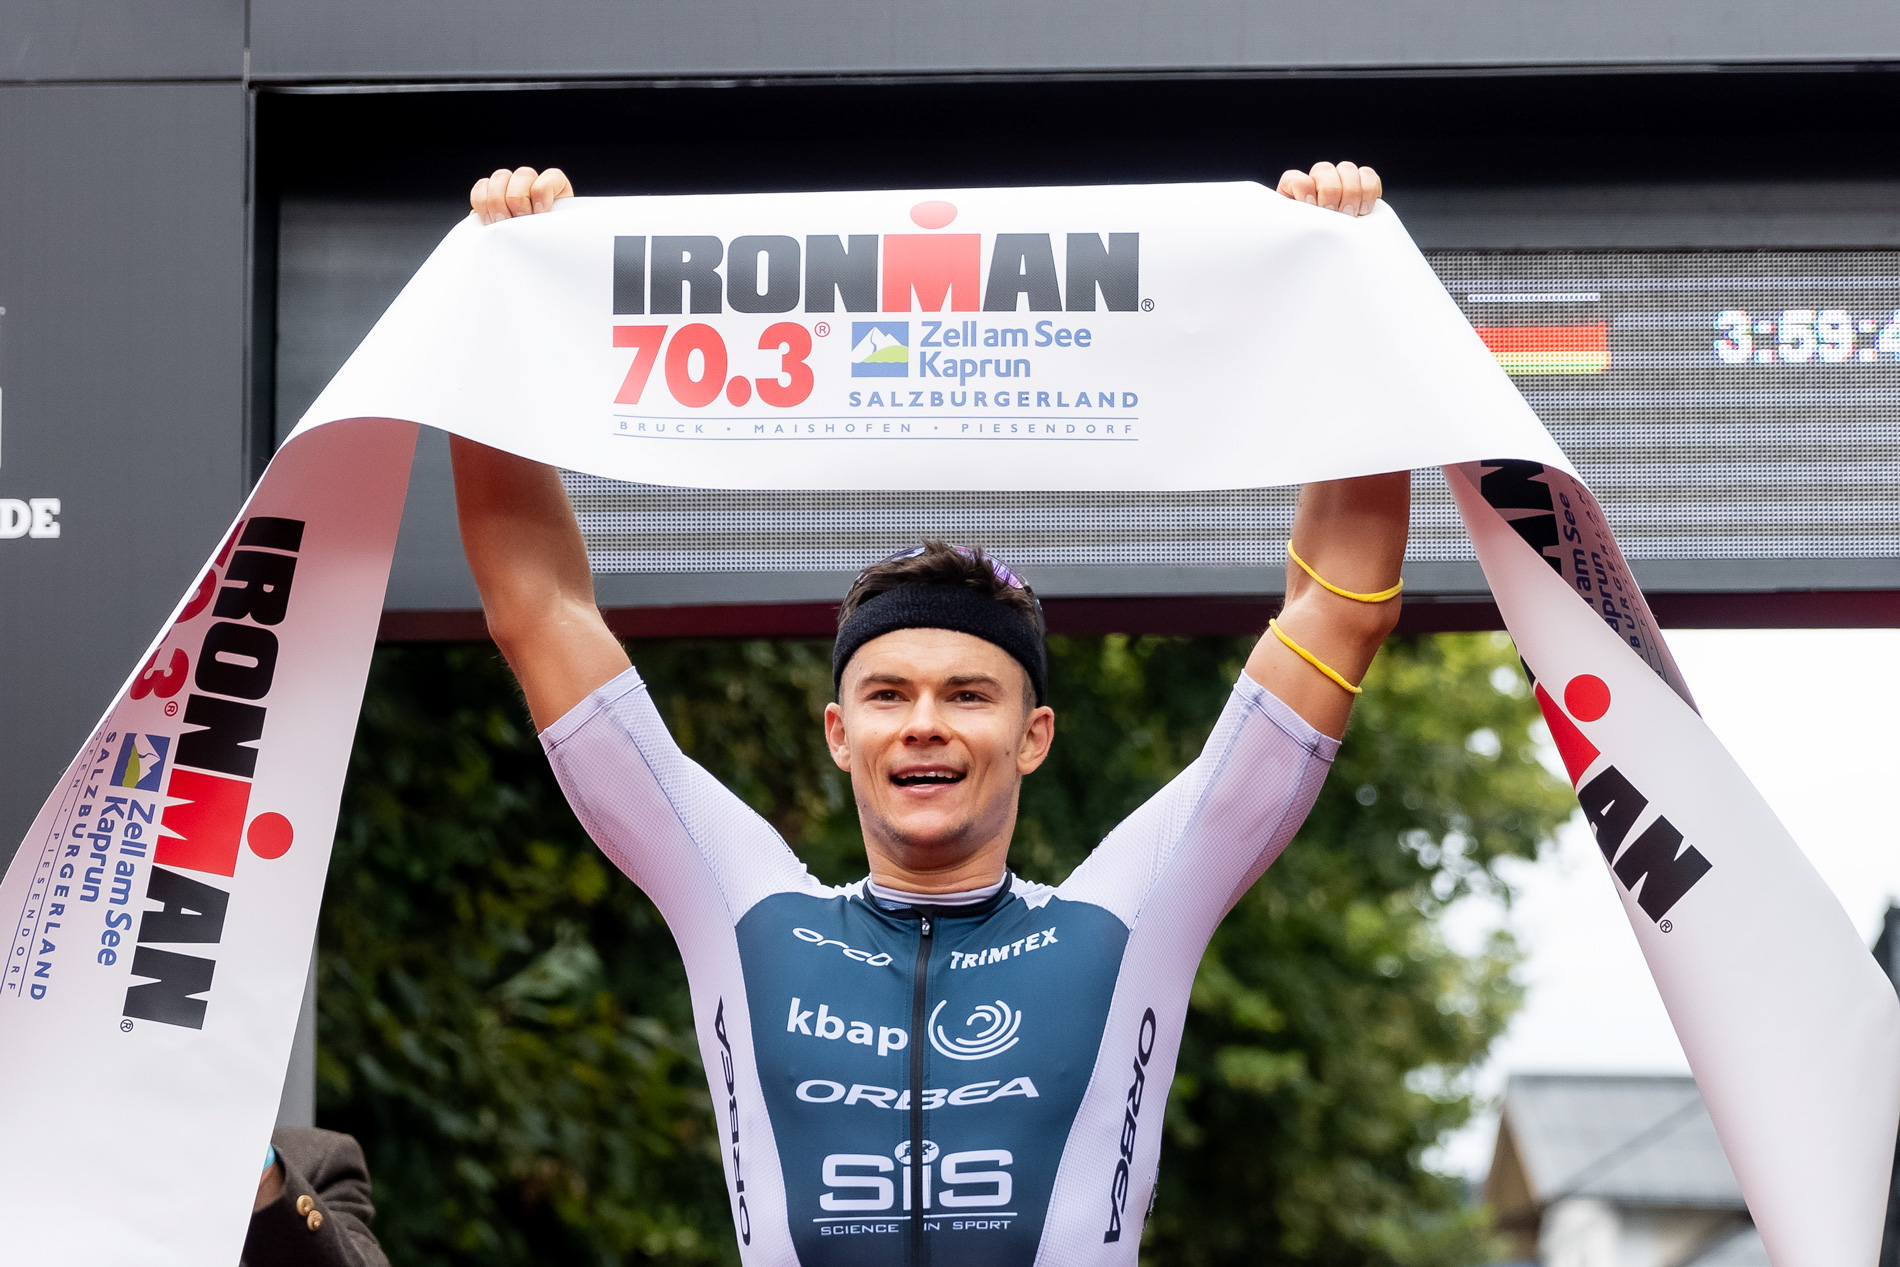 1st Place Ironman 70.3 Zell am See